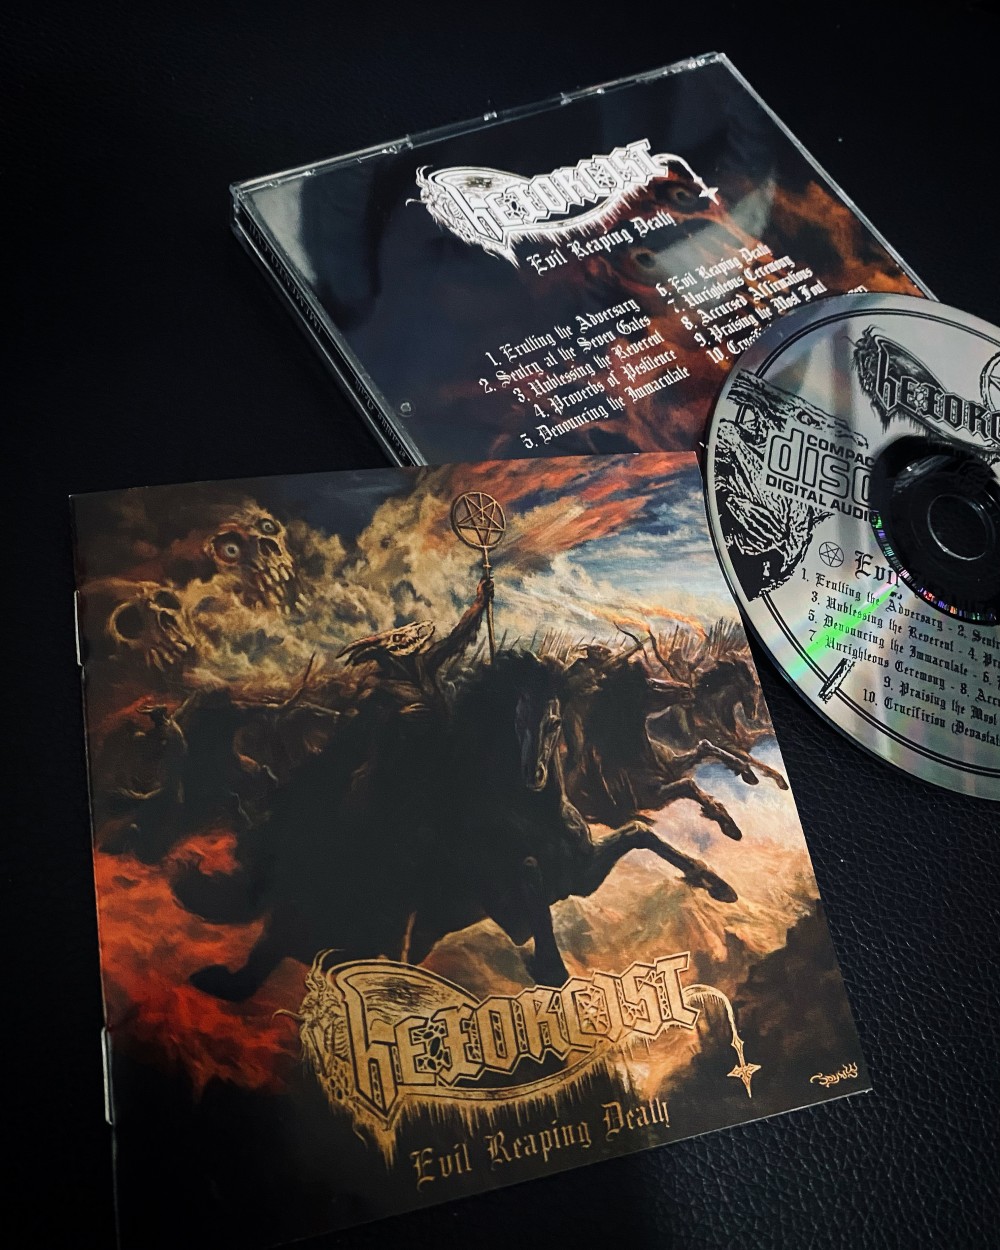 Hexorcist - Evil Reaping Death CD Photo